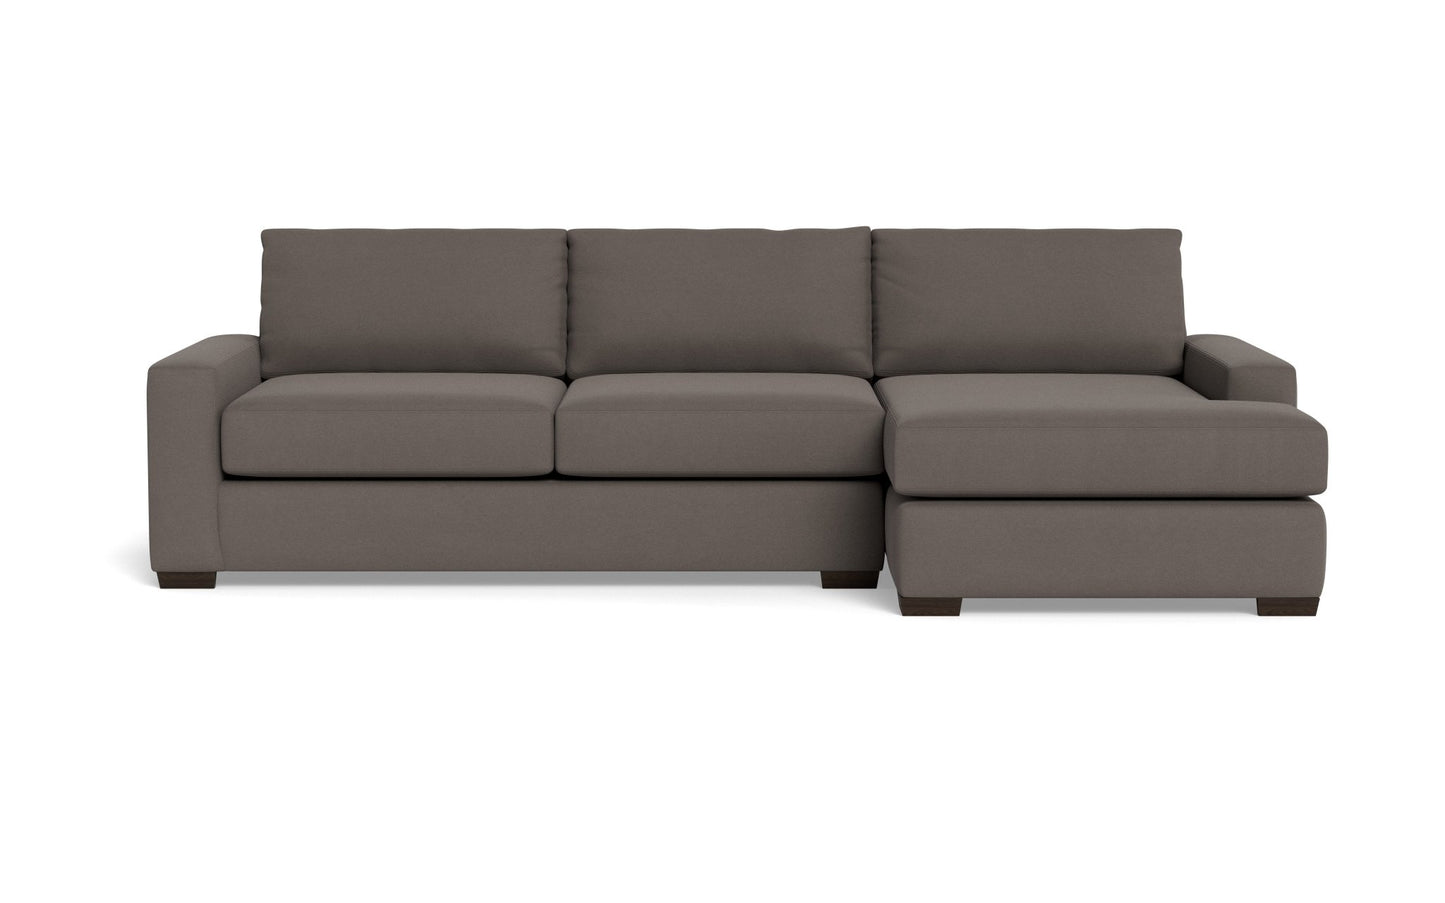 Mas Mesa Right Chaise Sectional - Bella Otter